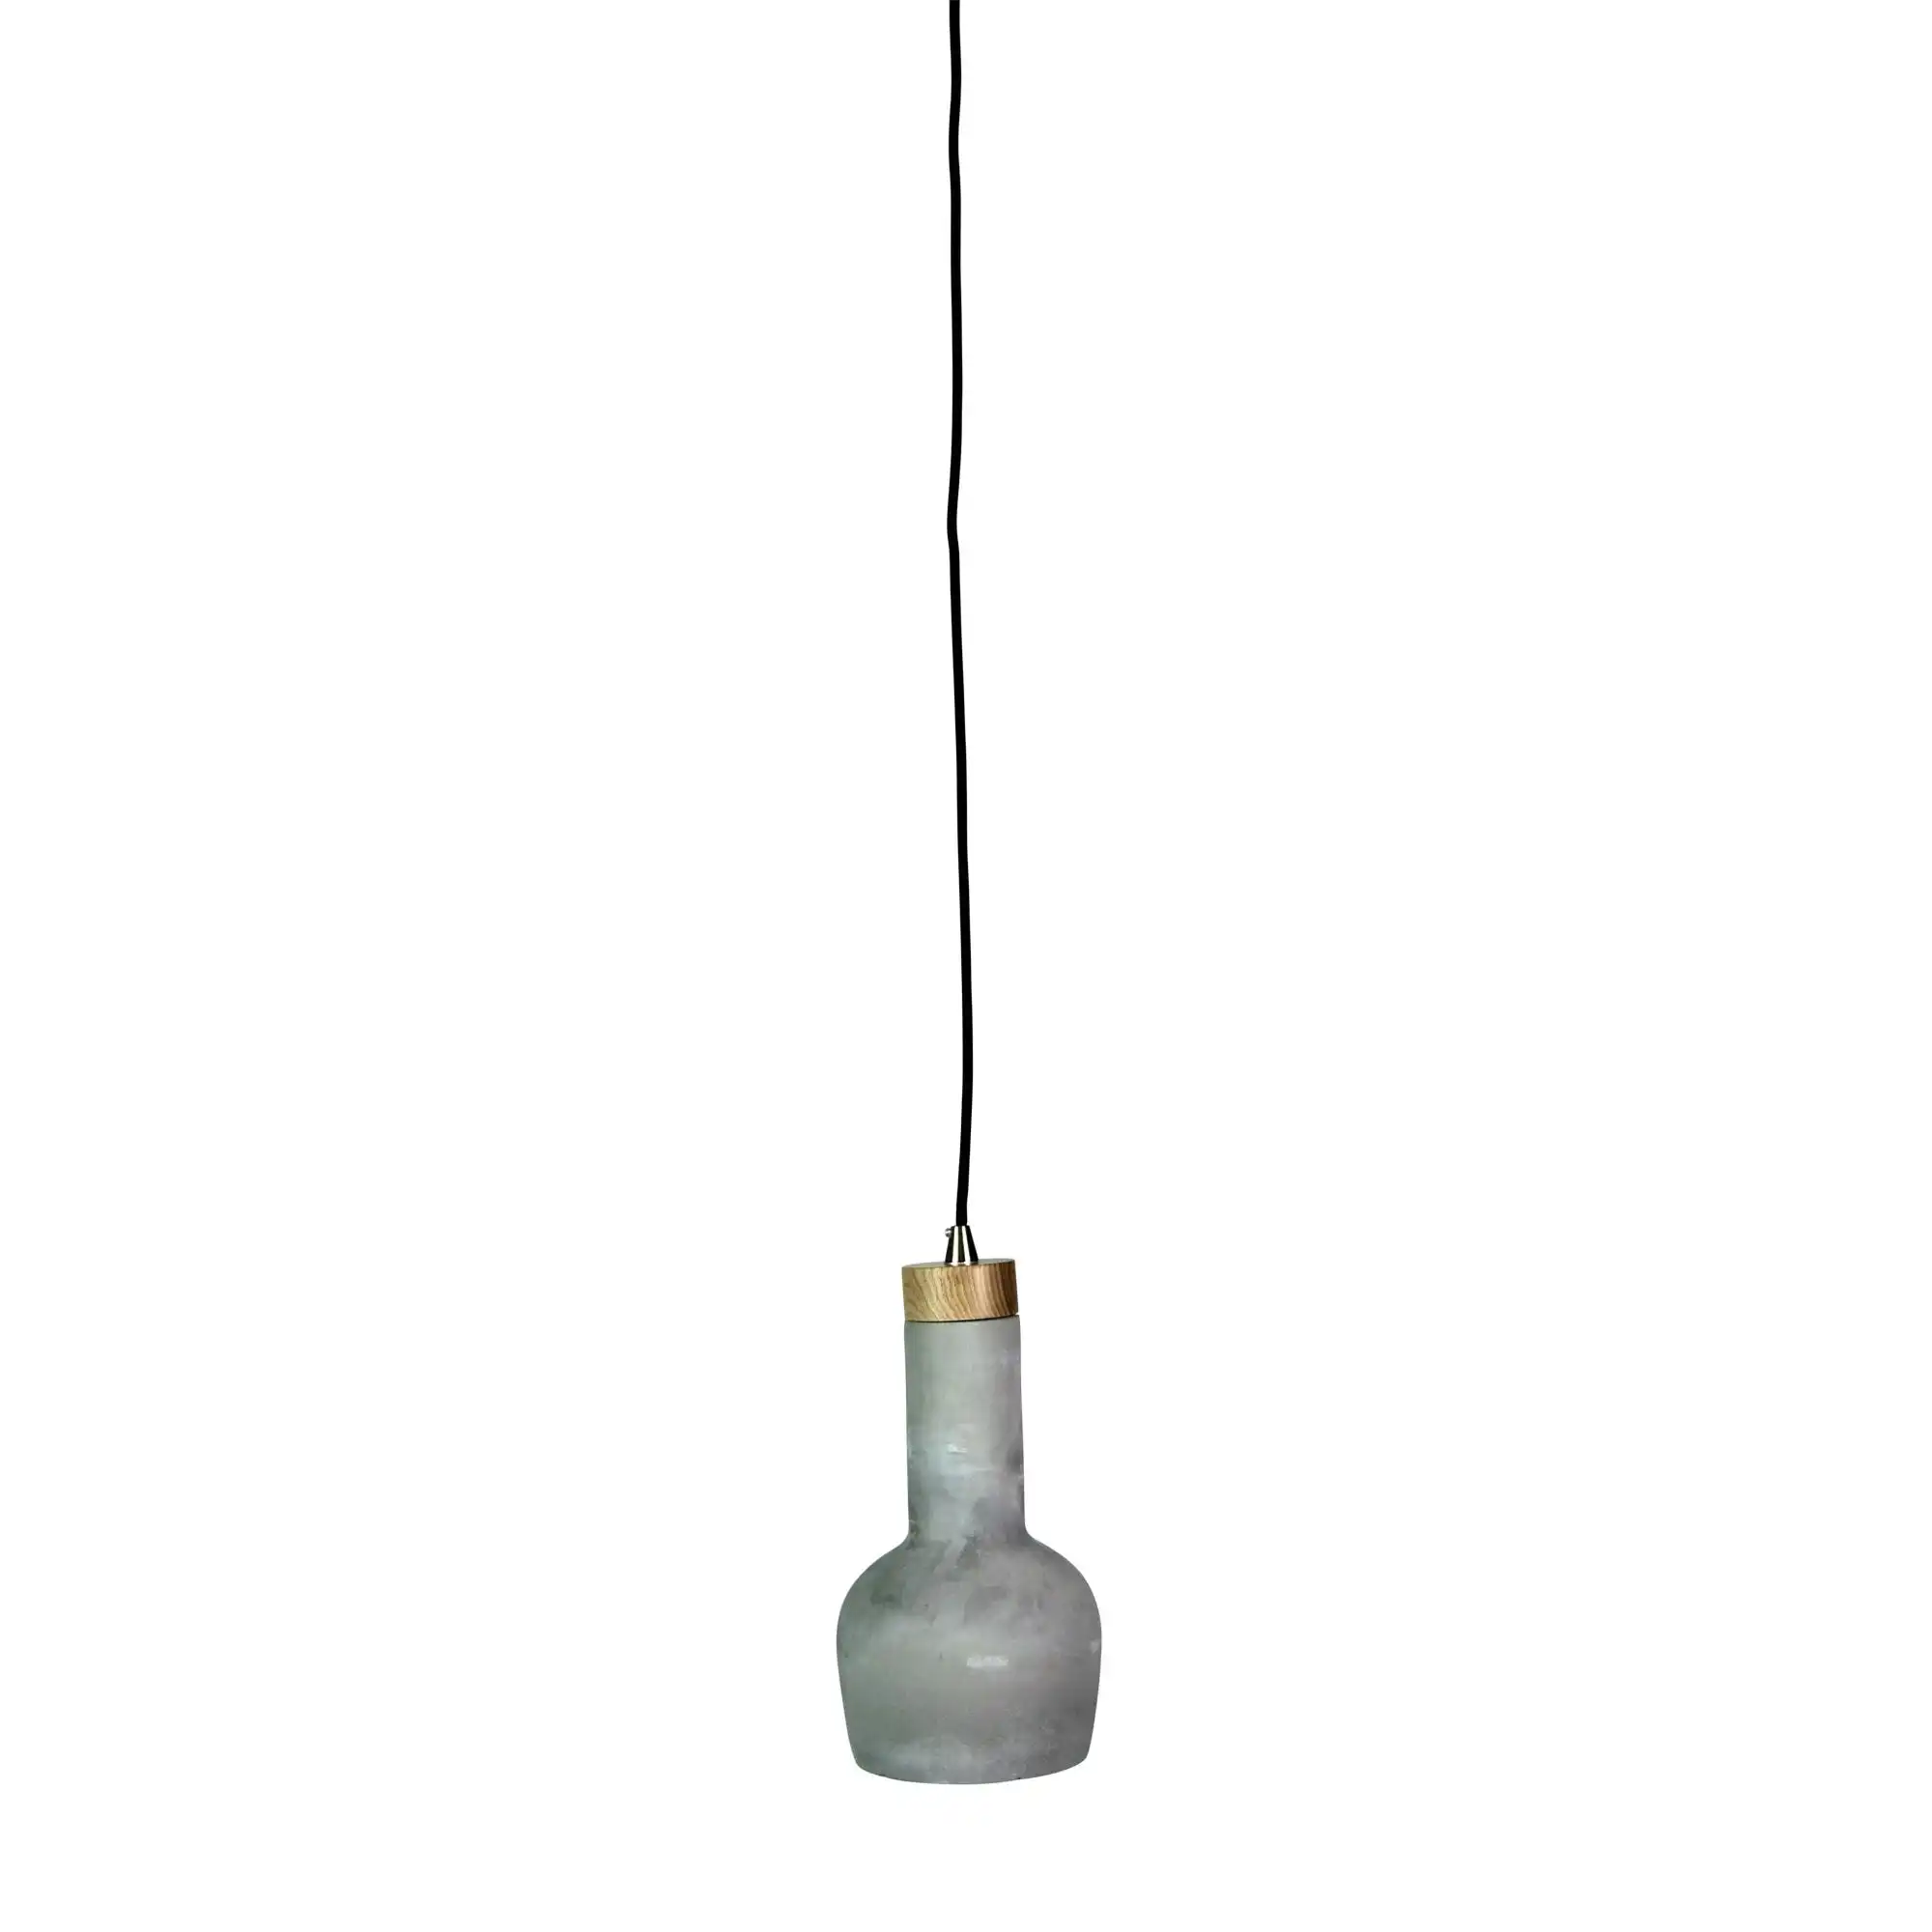 CONCRETE PANTO 2 Urban Style Pendant in Concrete and Timber